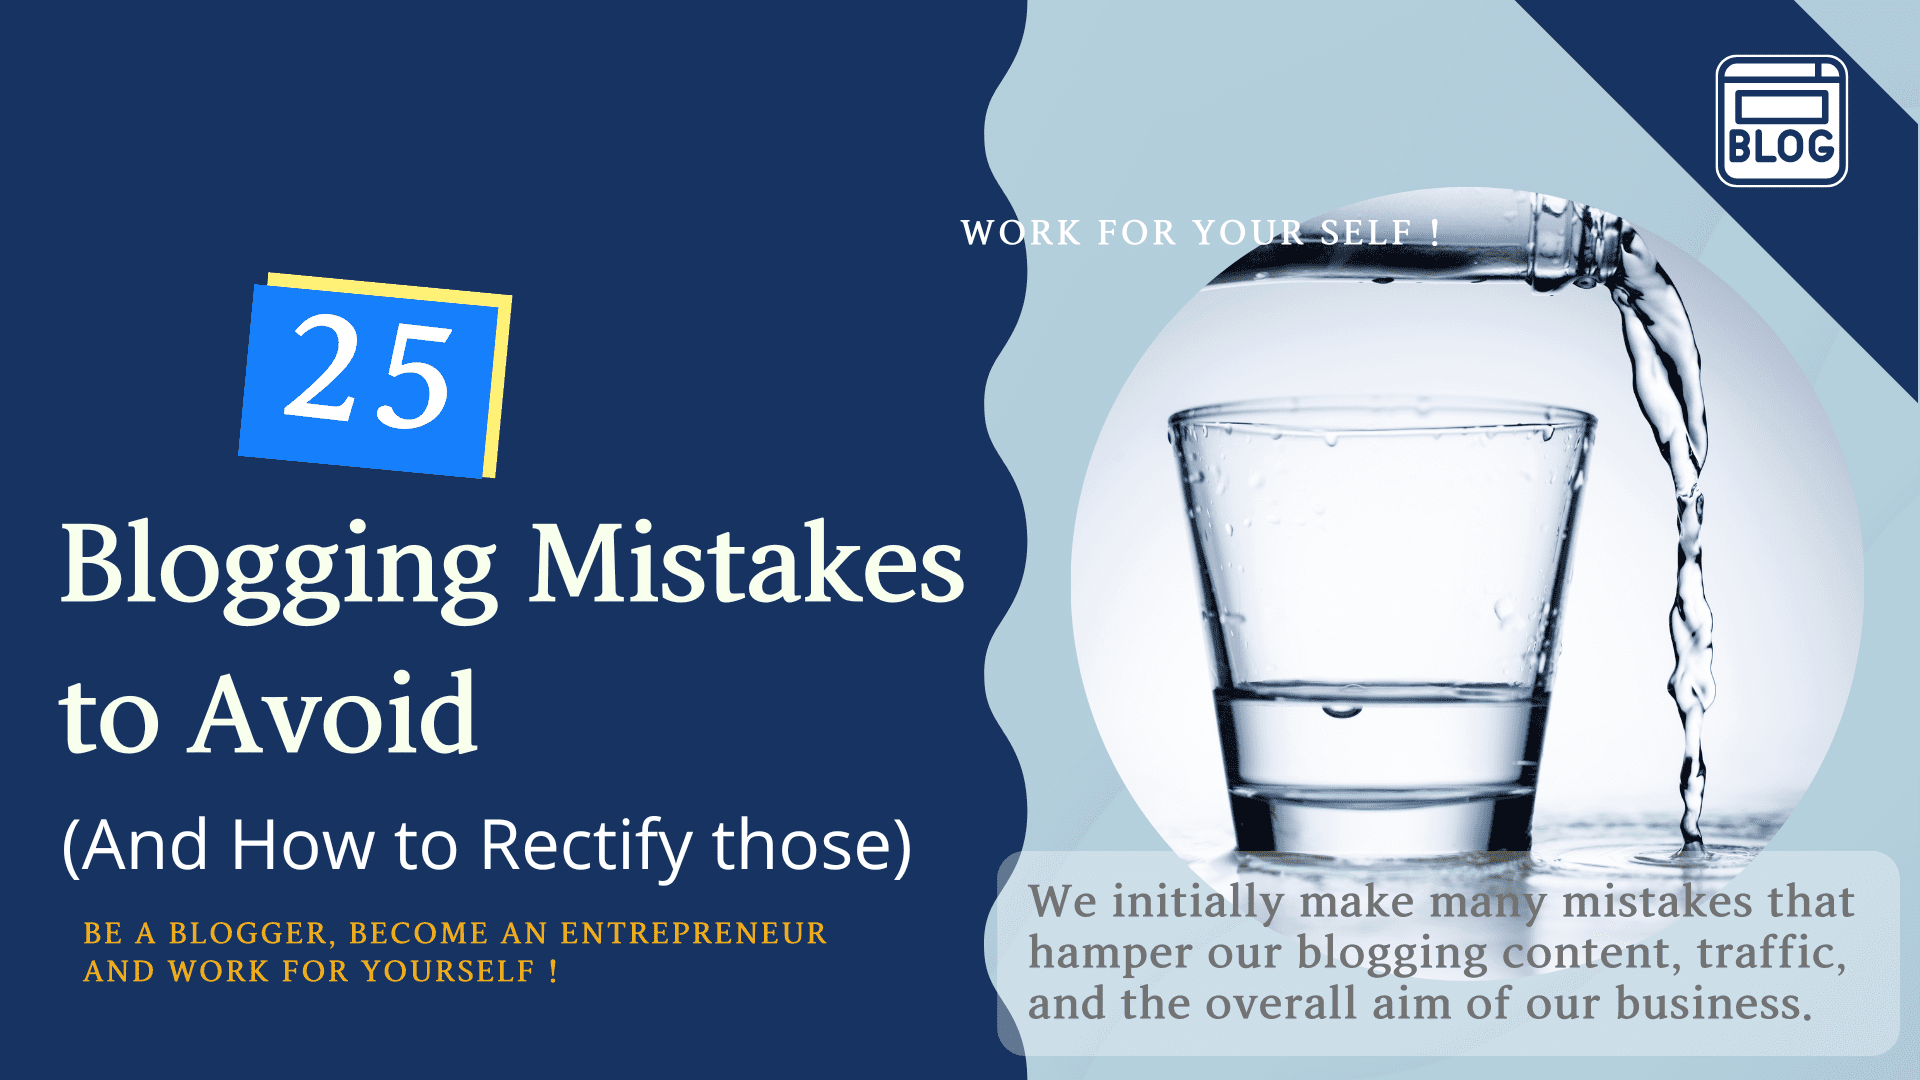 blogging-mistakes-to-avoid-and-rectify-mssaro